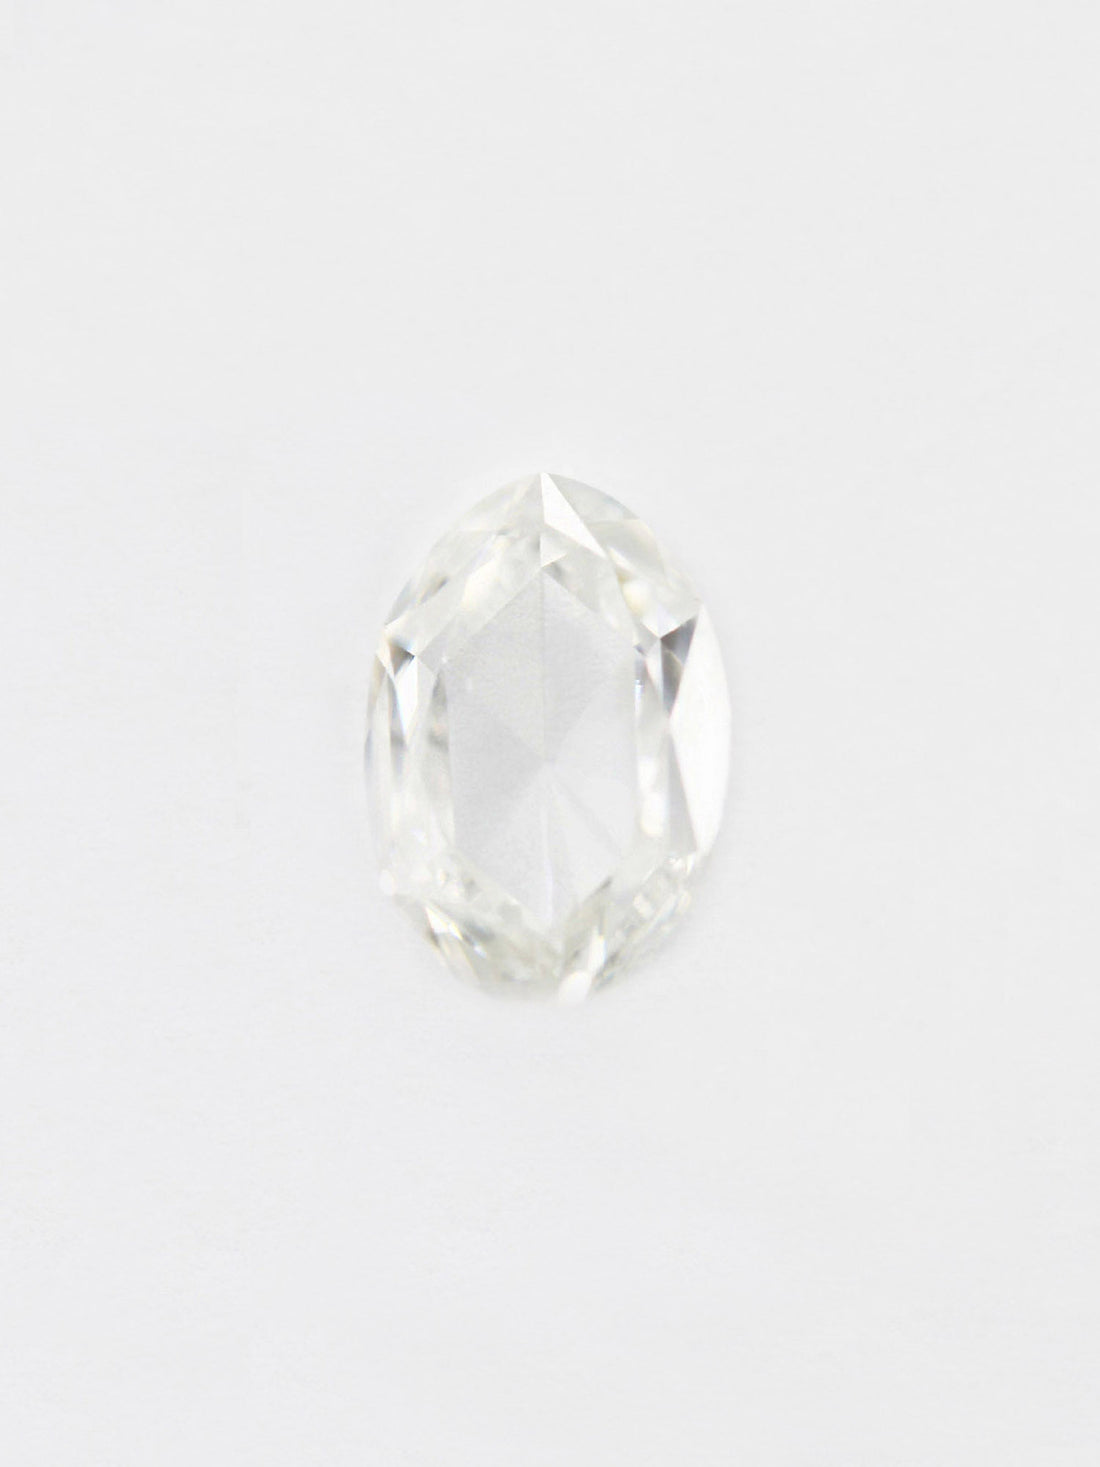 1.17CT White Moissanite Inventory SKU MSOVAL-01